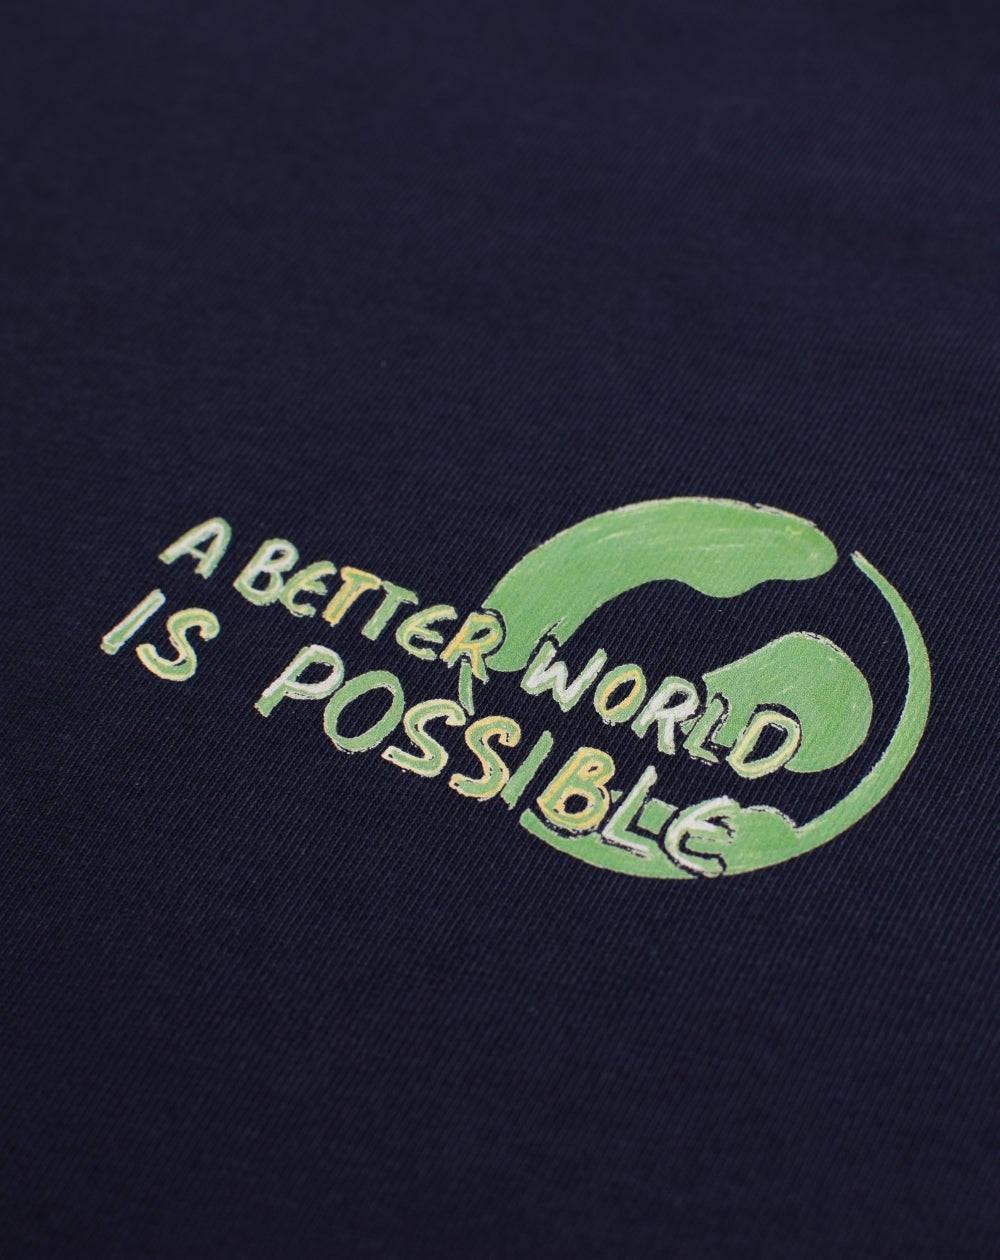 A Better World Is Possible | Oversized Unisex